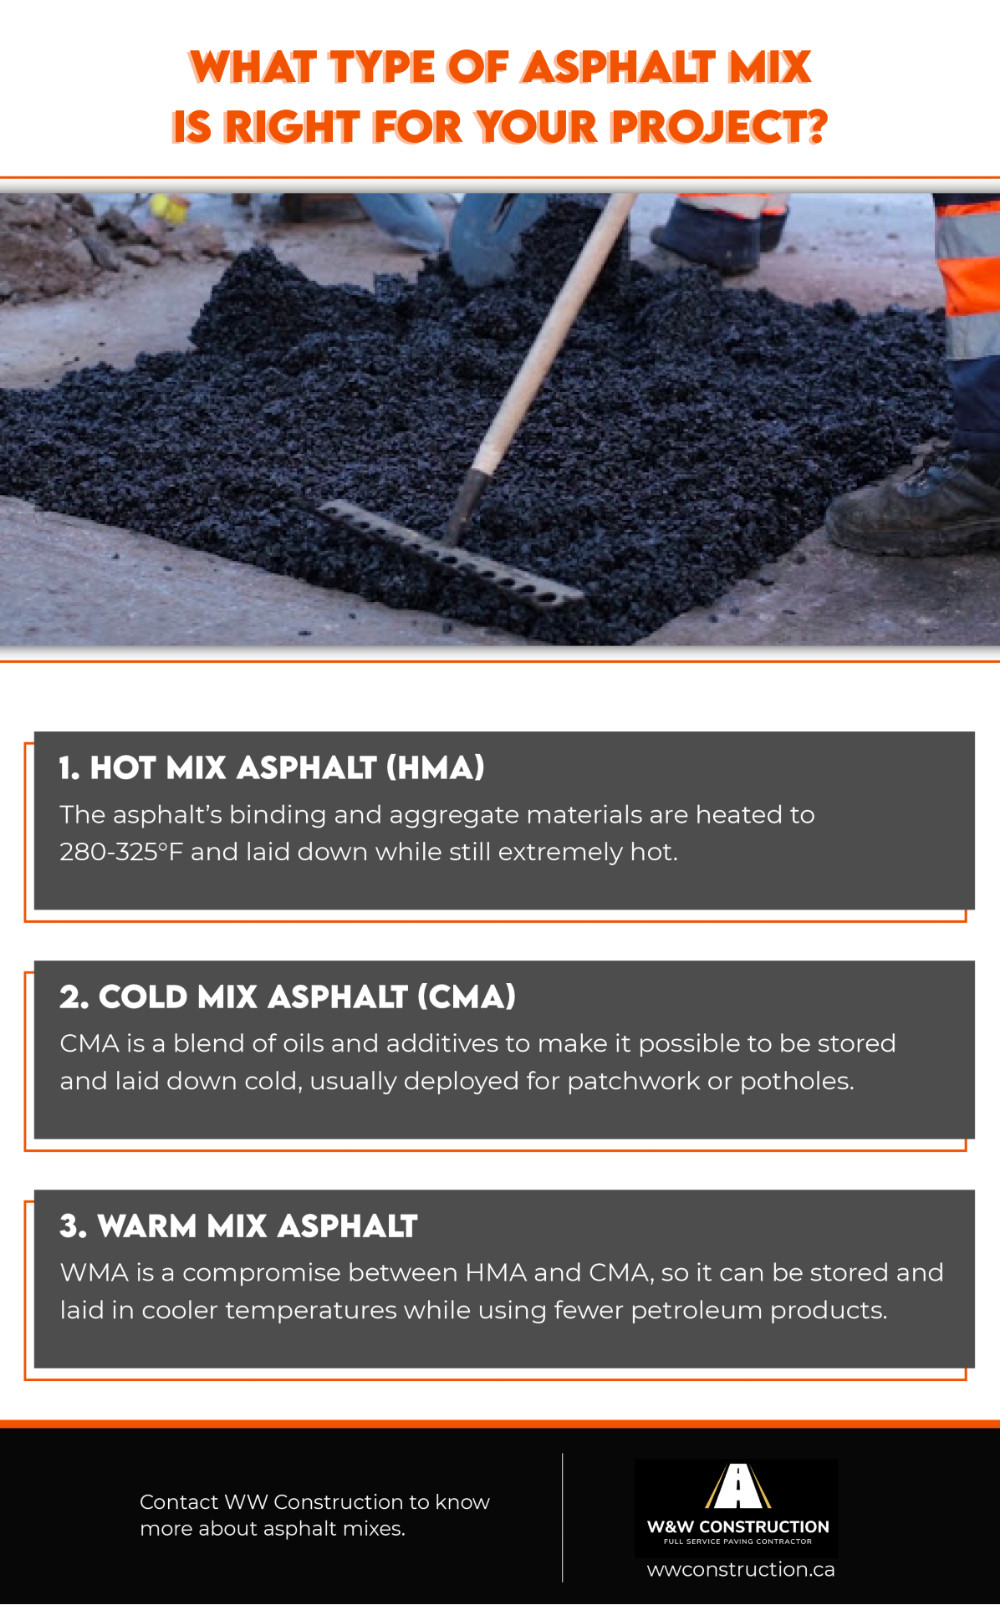 What Type of Asphalt Mix is Right For Your Project